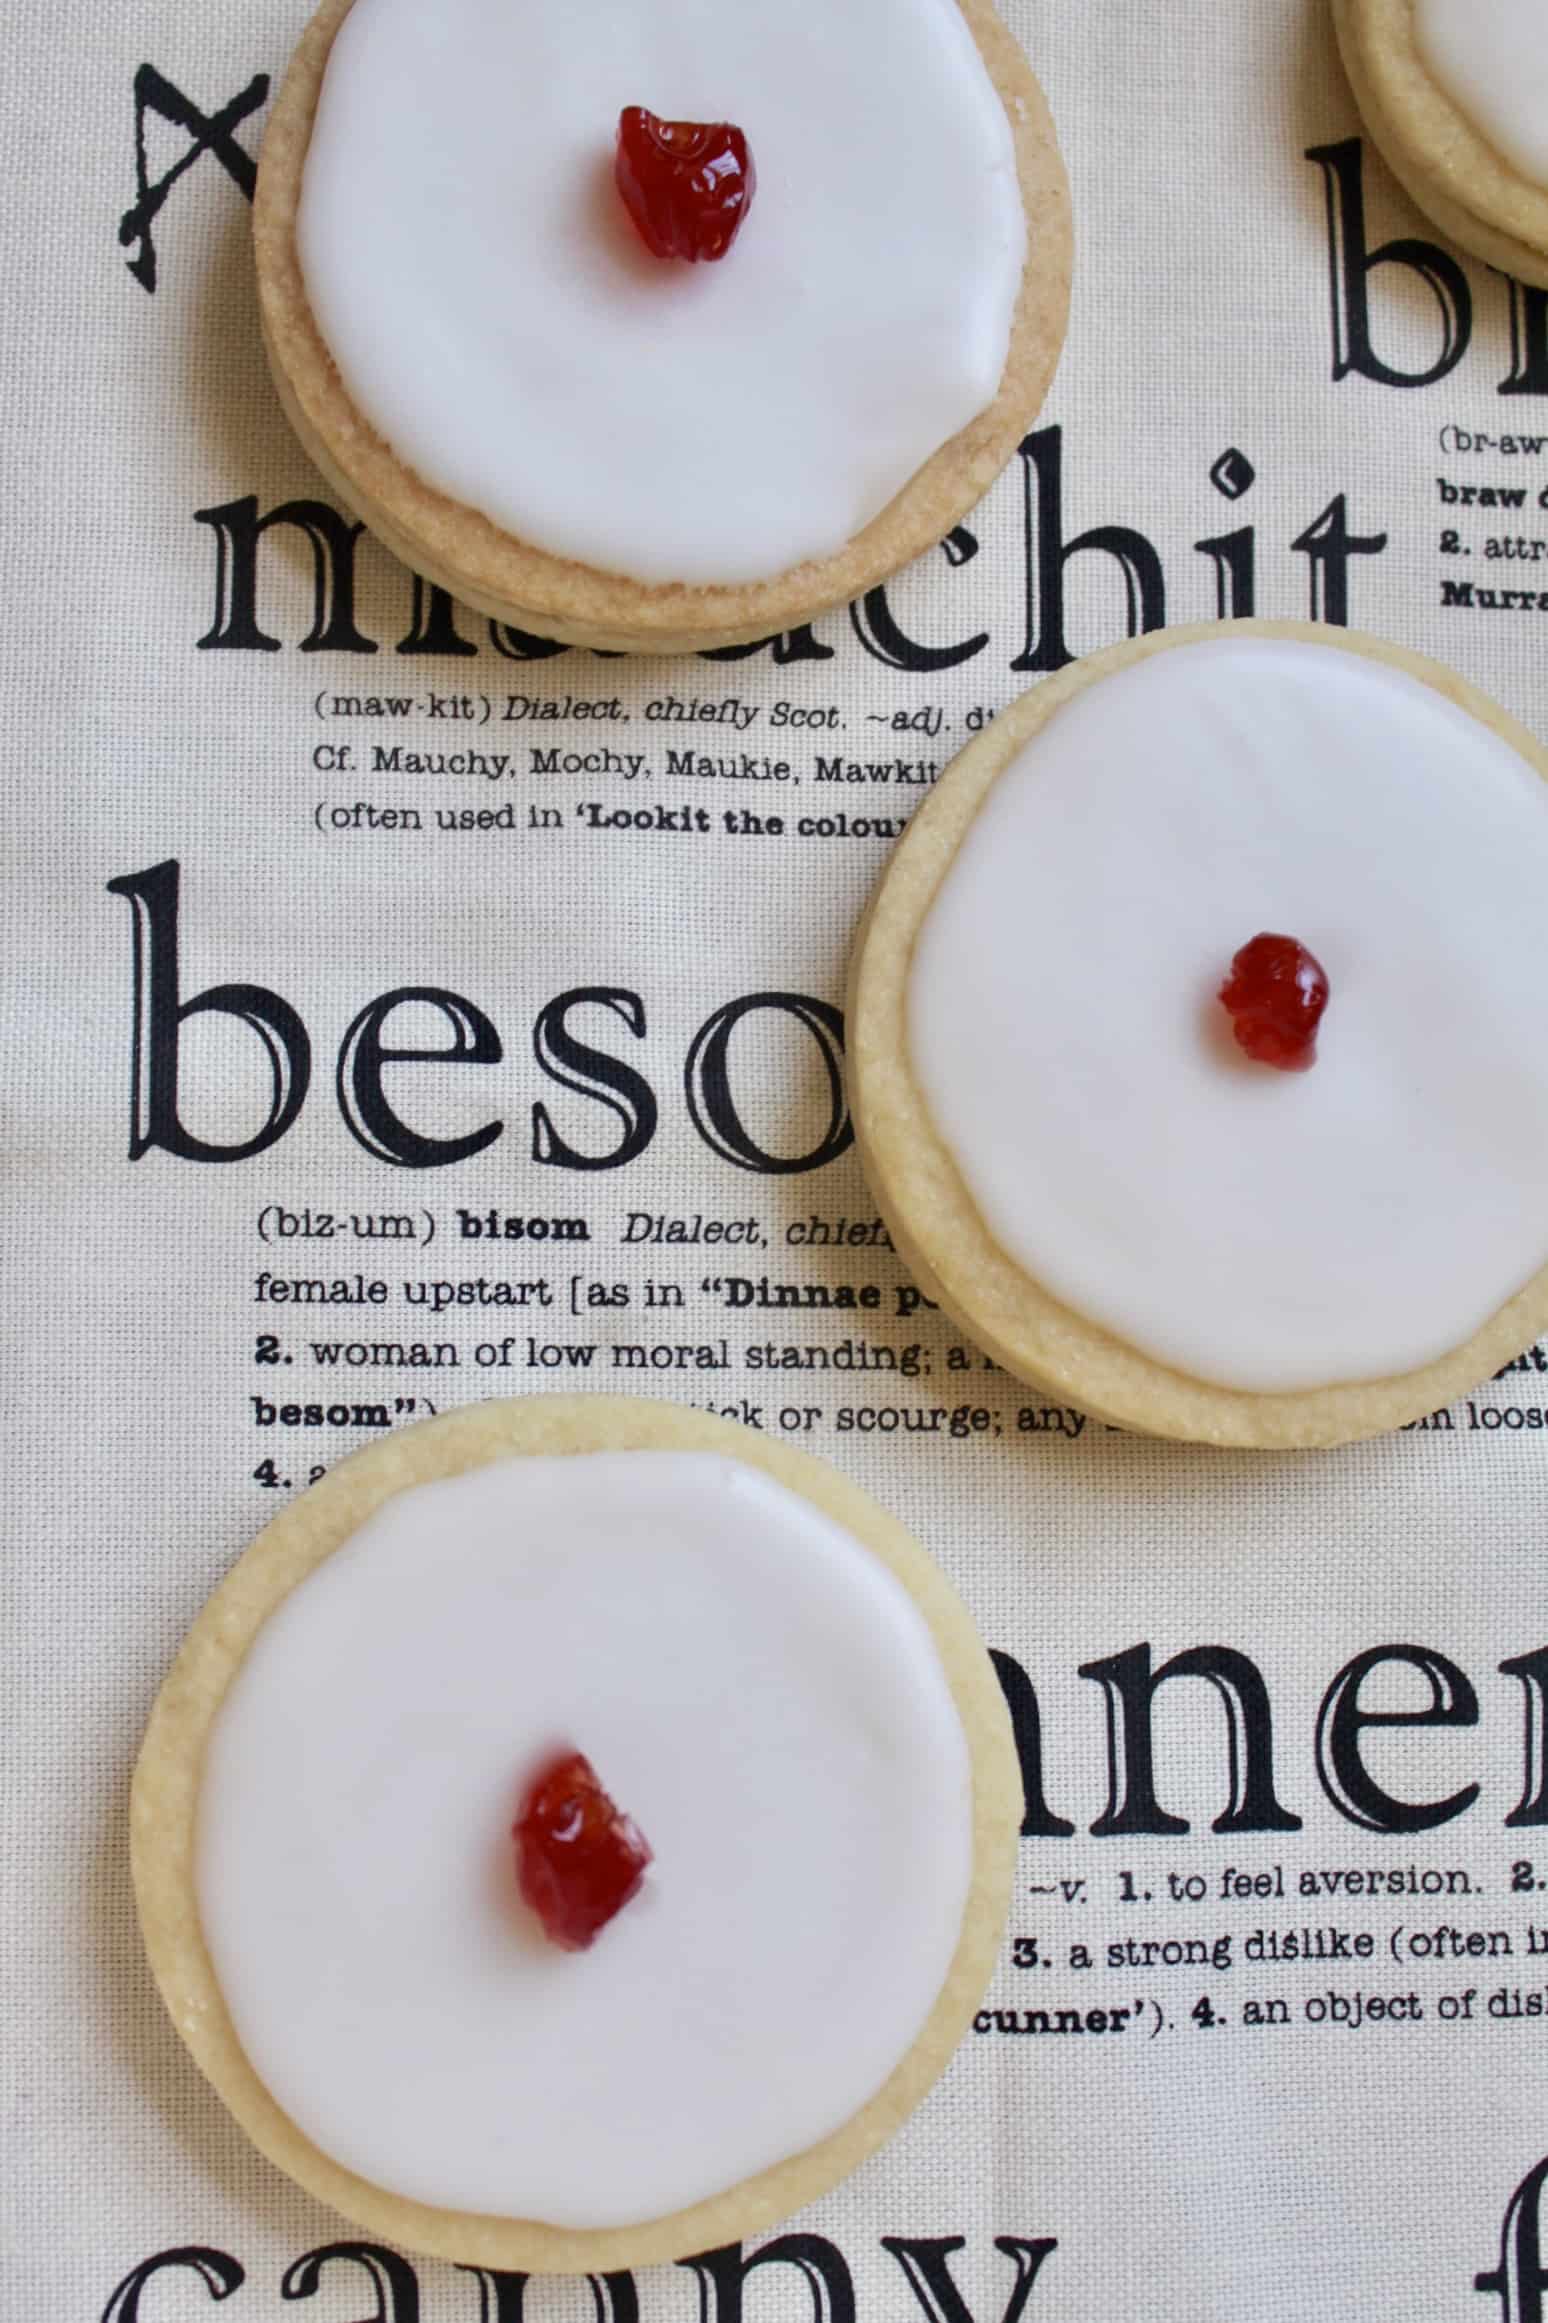 A group of unique cookies with red cherries on top.